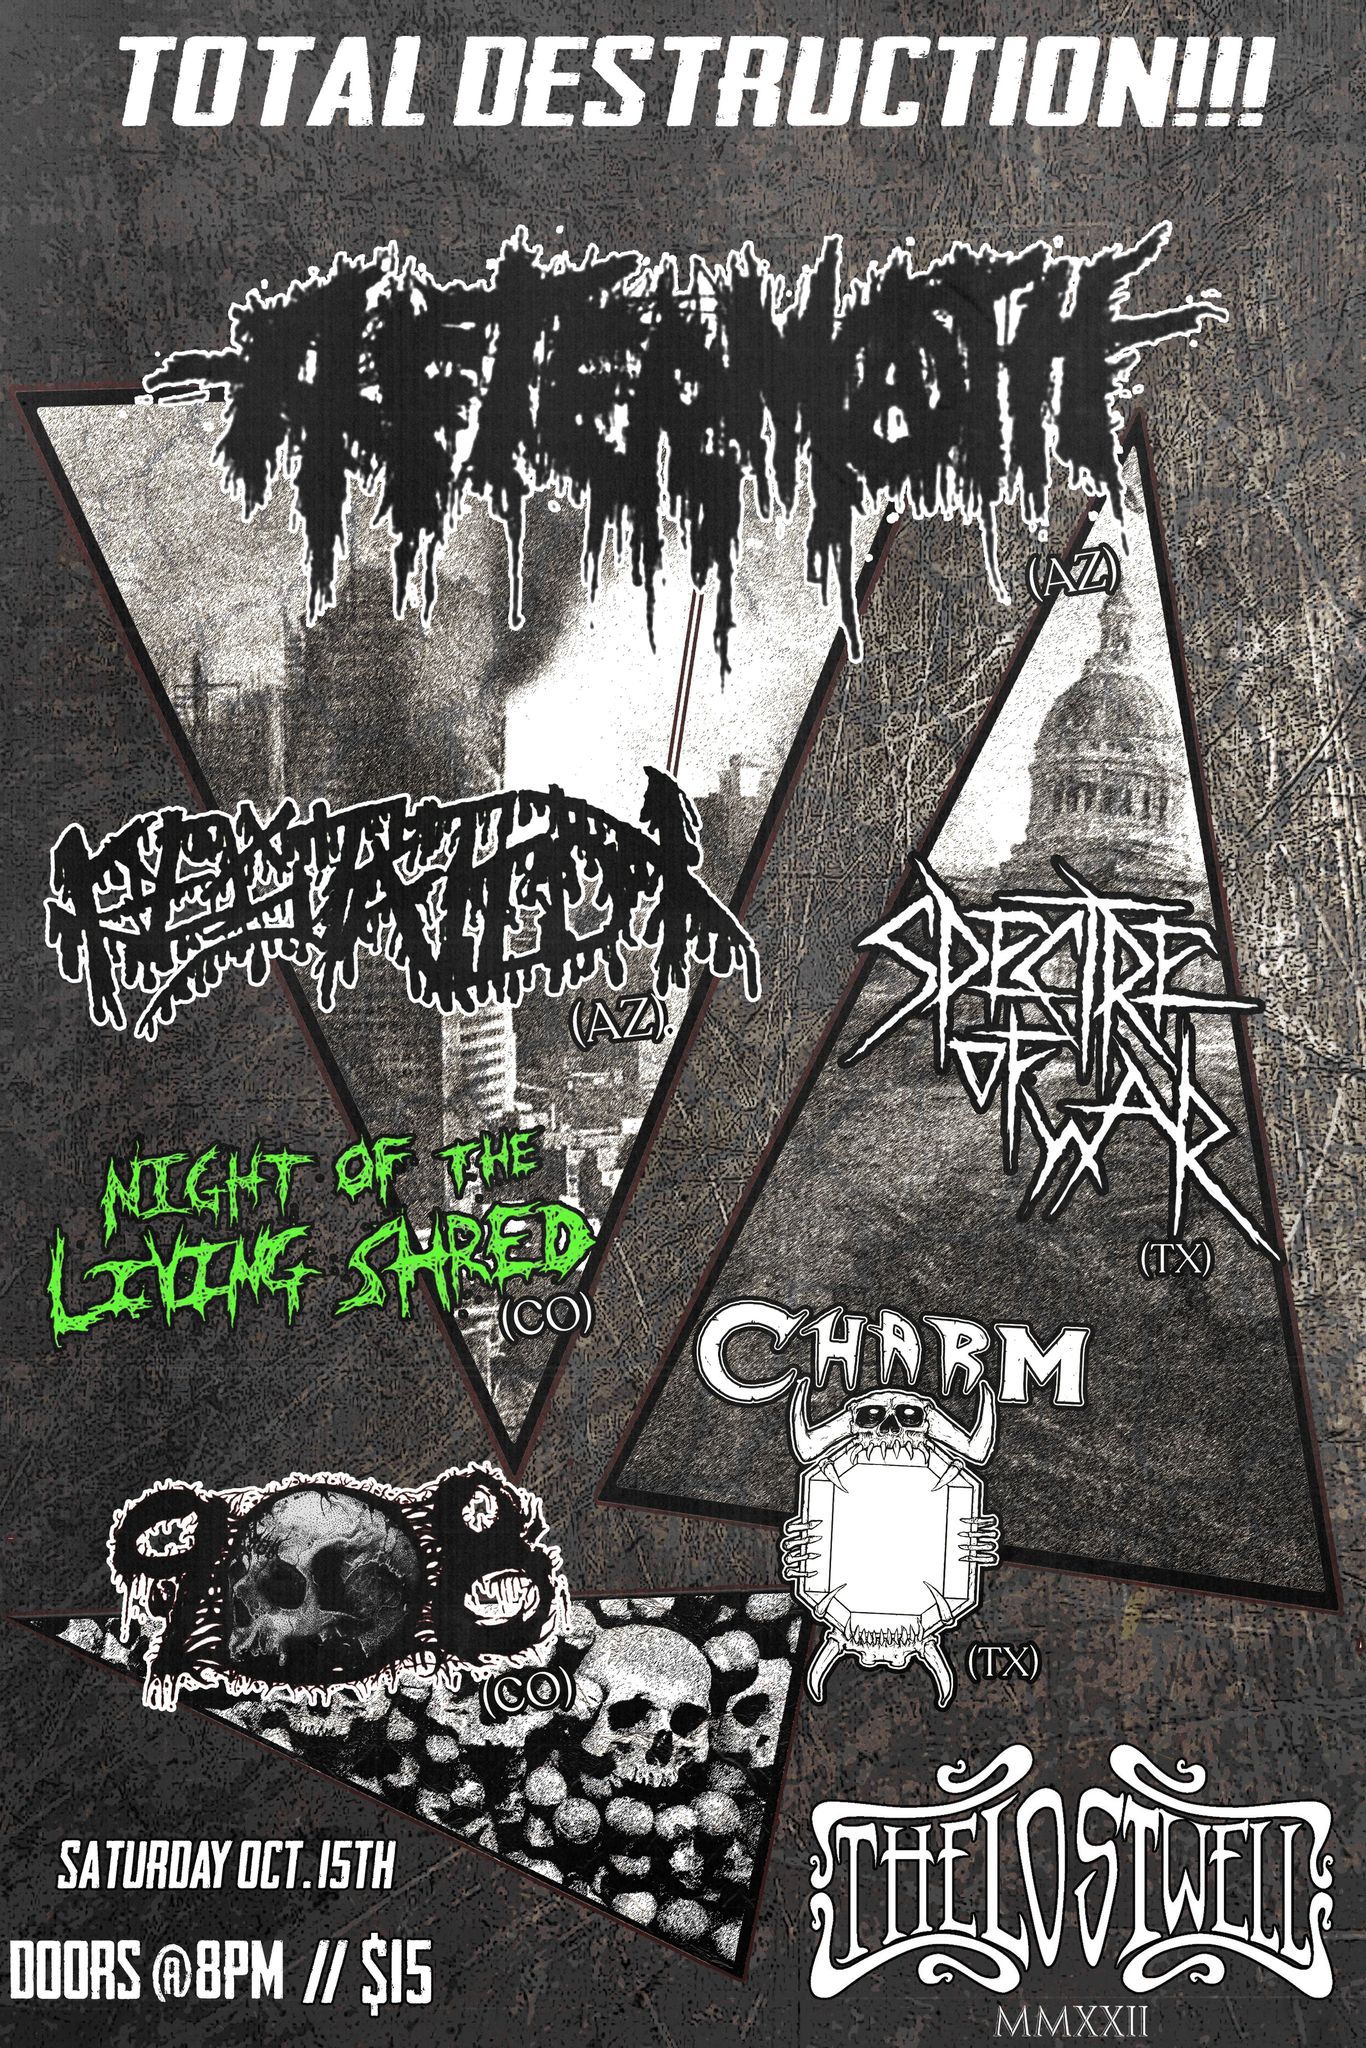 Aftermath, Gestation, Spectre of War, Night of the Living Shred, 908, Charm